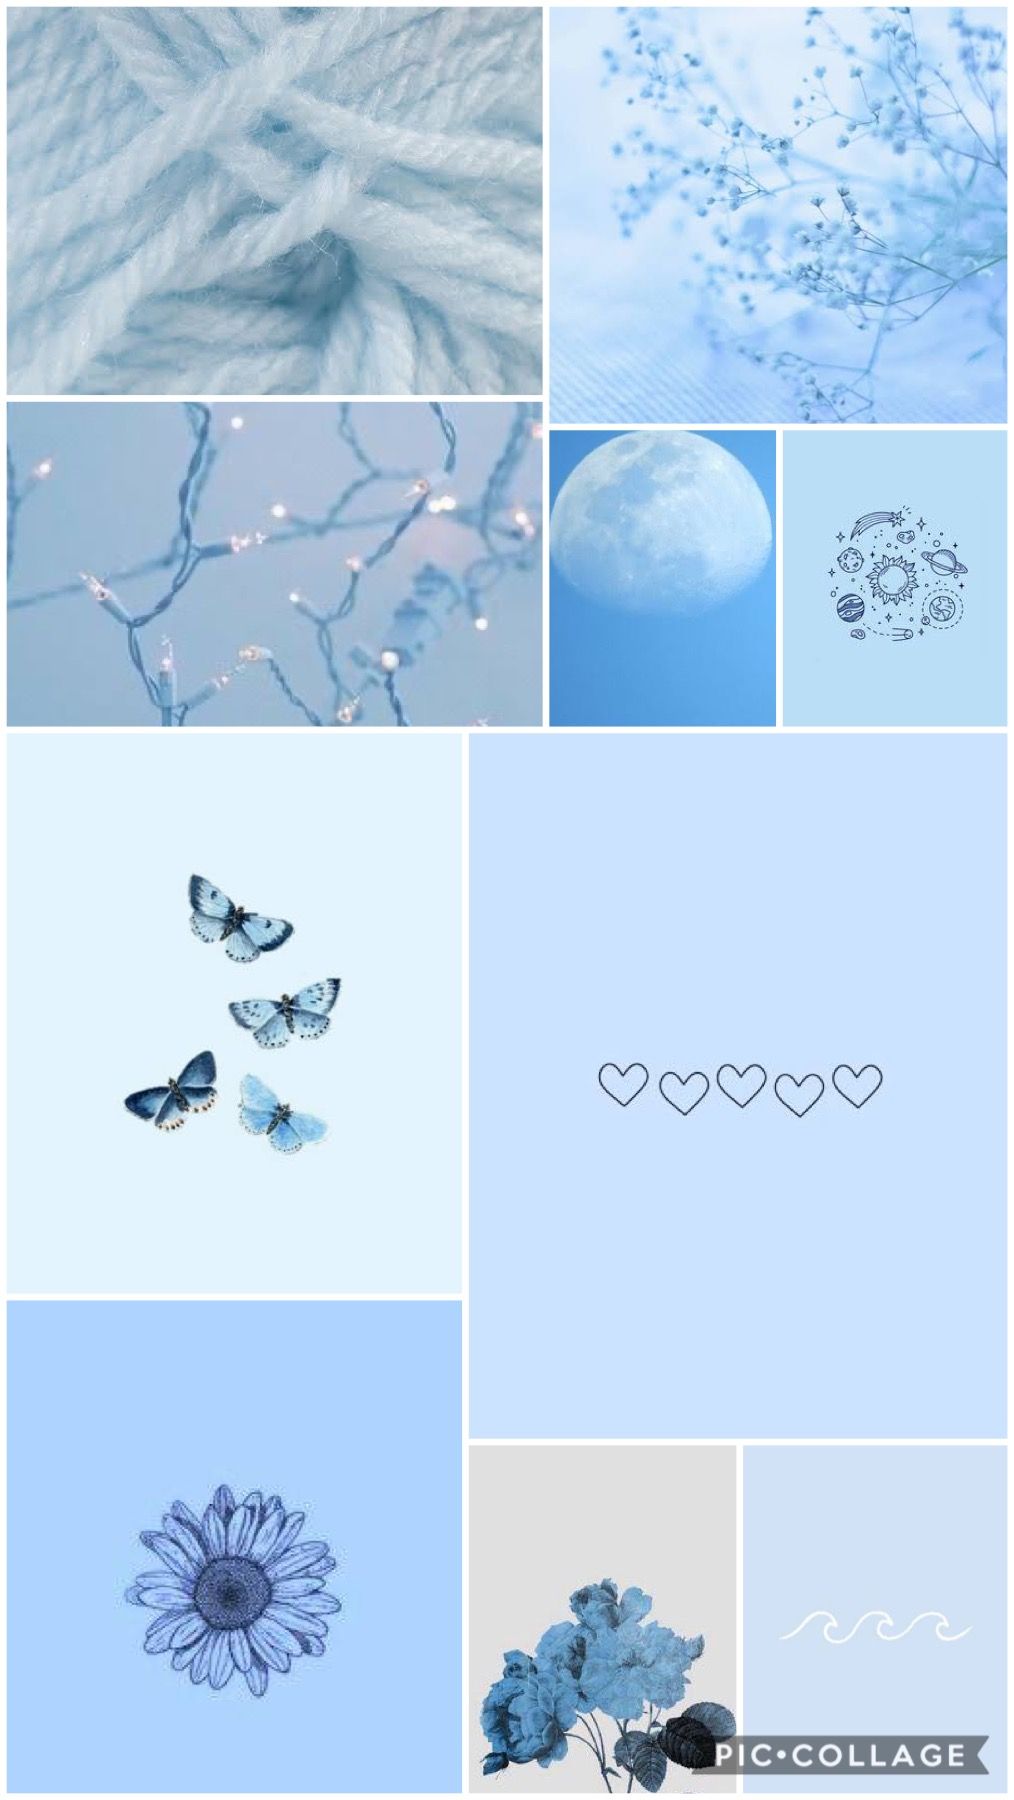 Baby Blue Aesthetic Wallpaper. Blue background wallpaper, Cute blue wallpaper, Baby blue wallpaper